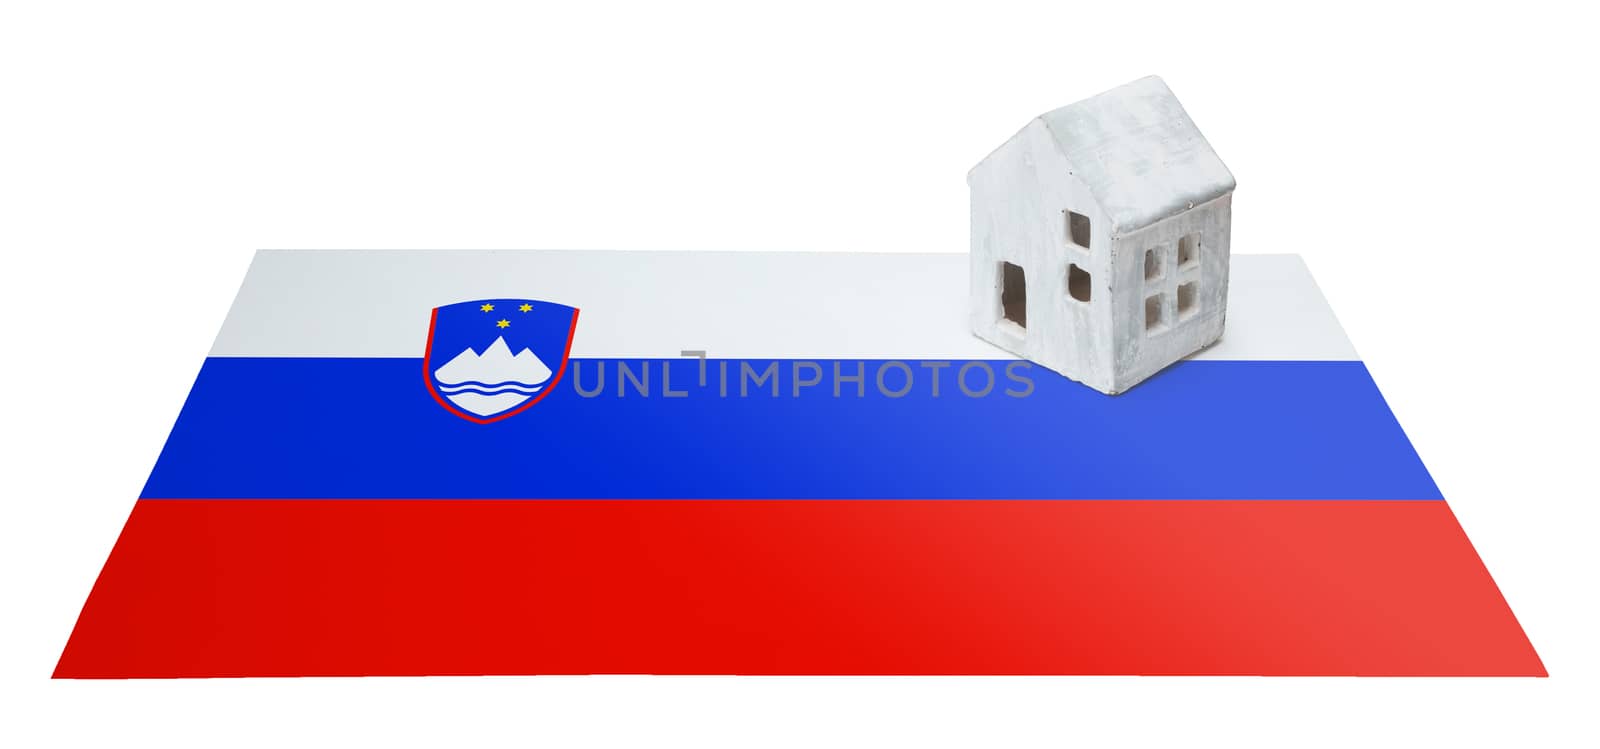 Small house on a flag - Living or migrating to Slovenia